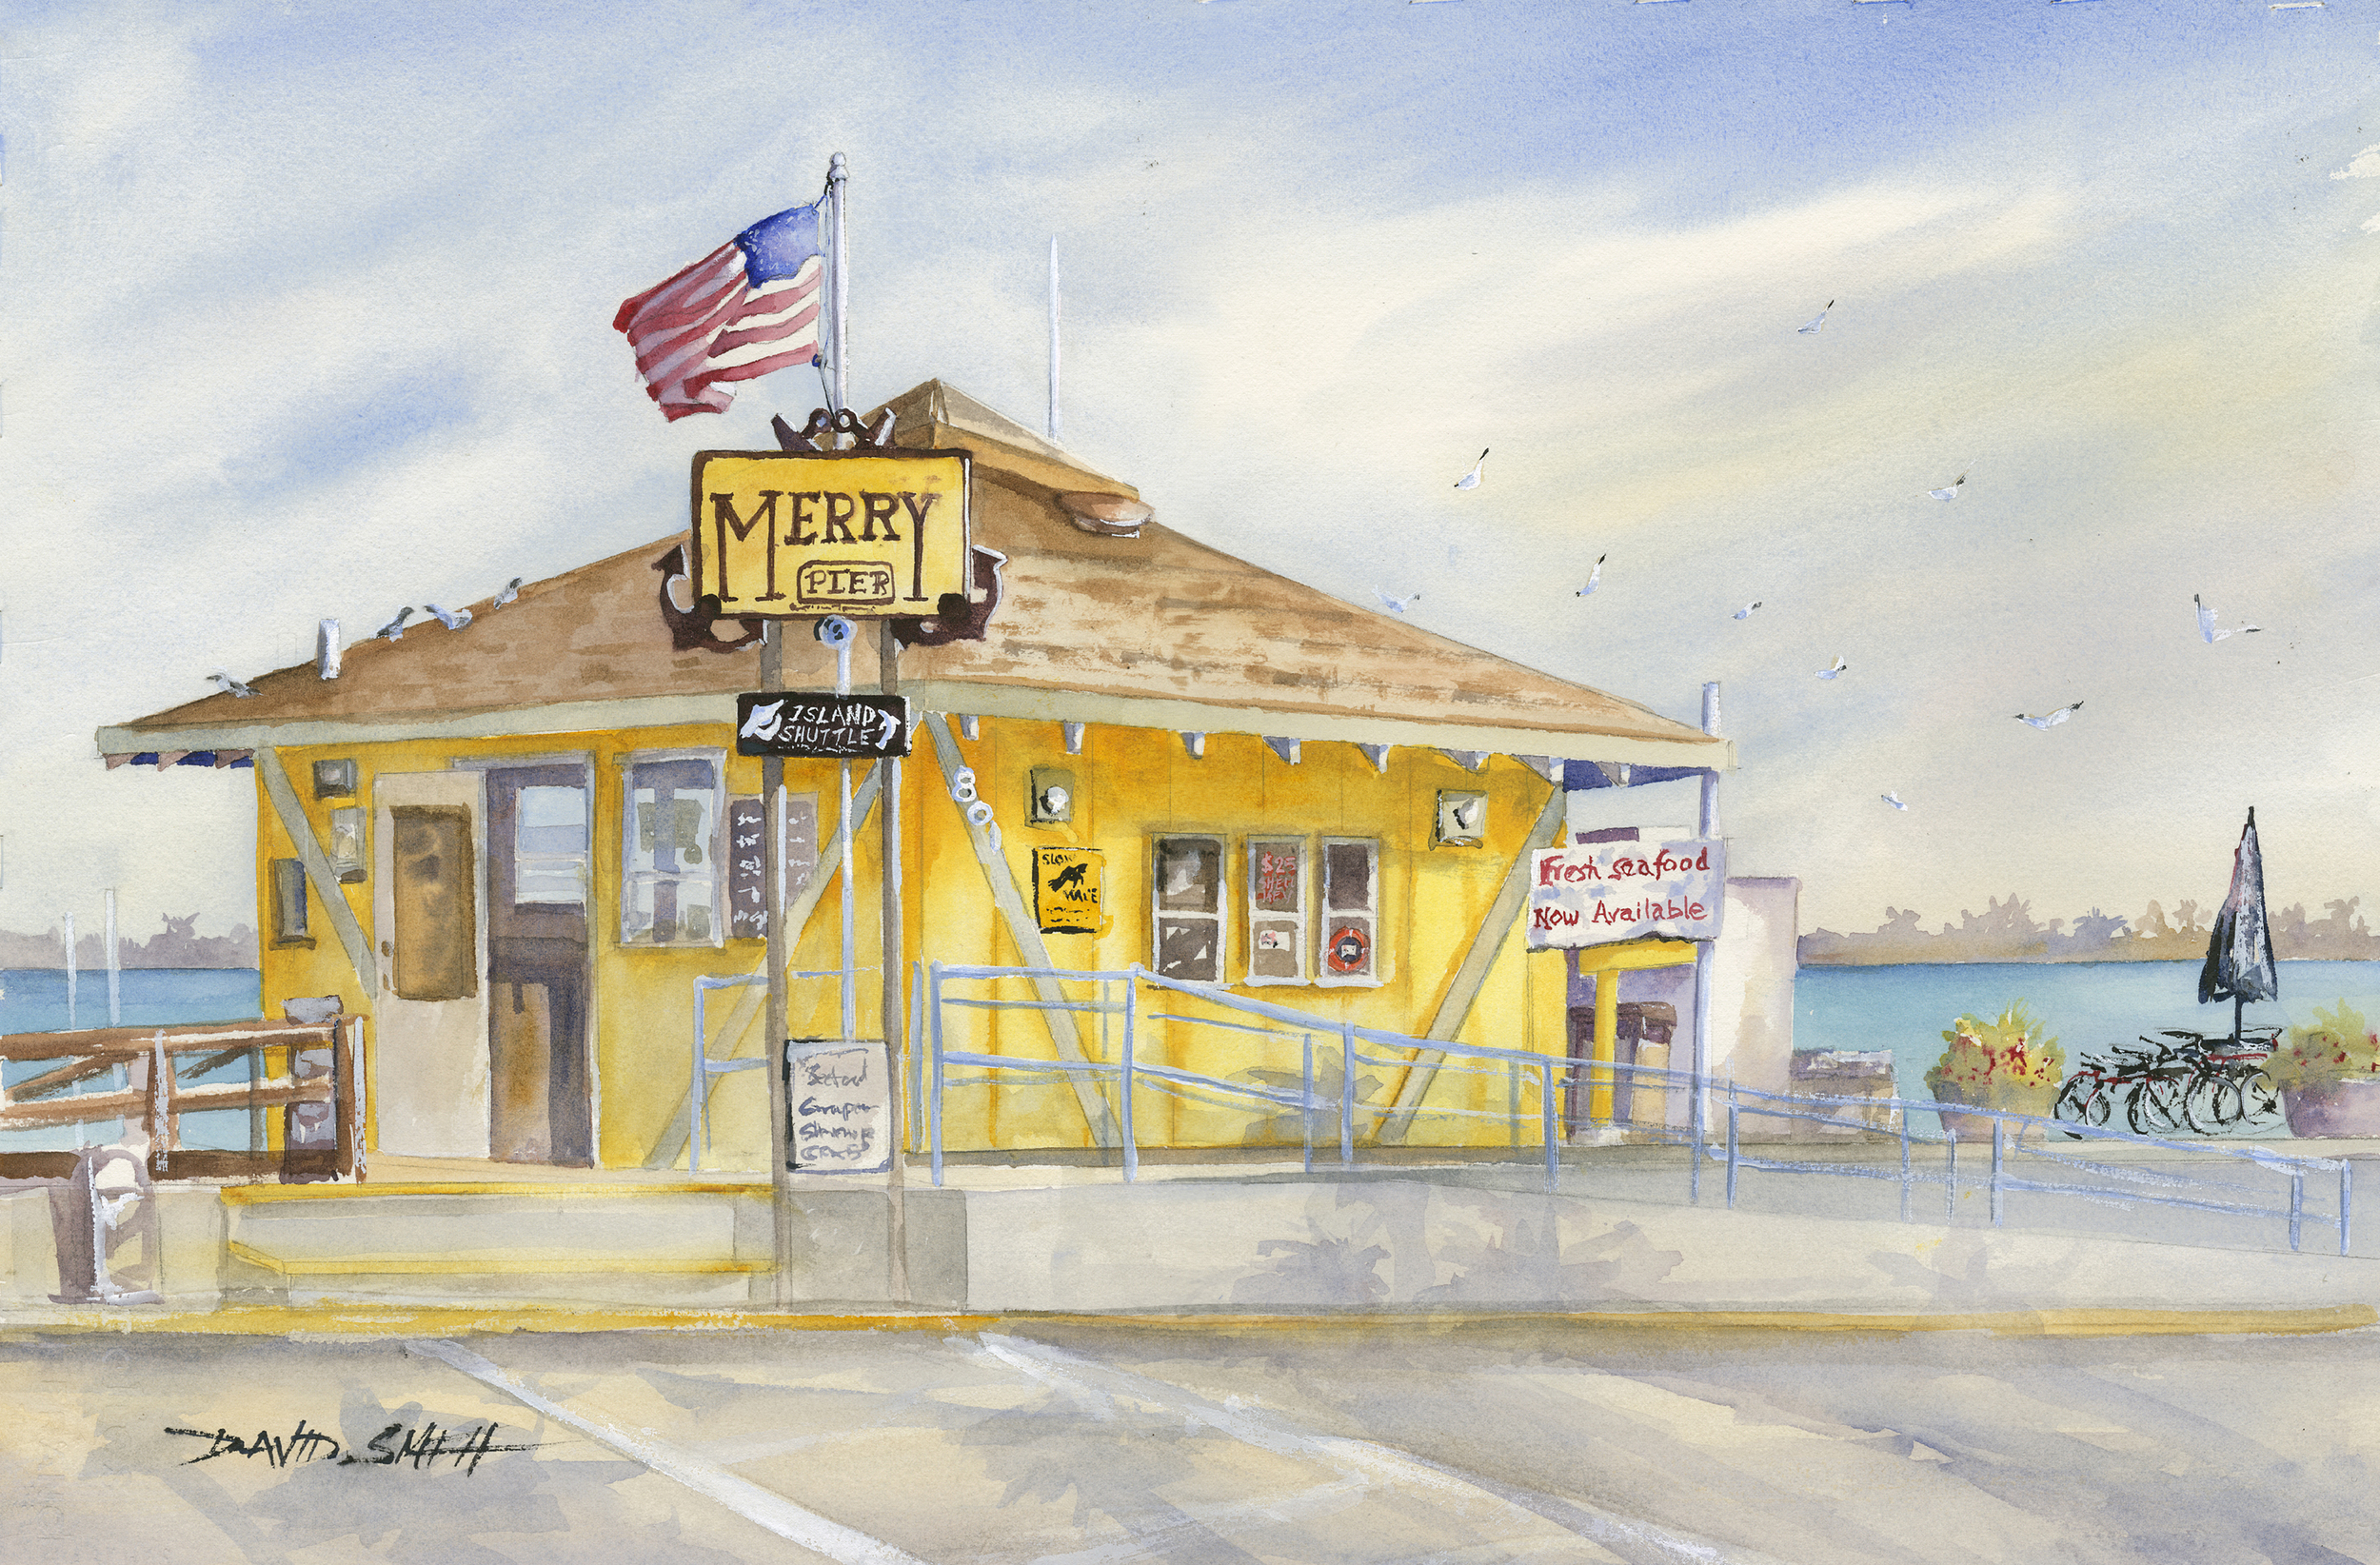 "Merry Pier #3" - Sold - Prints Available